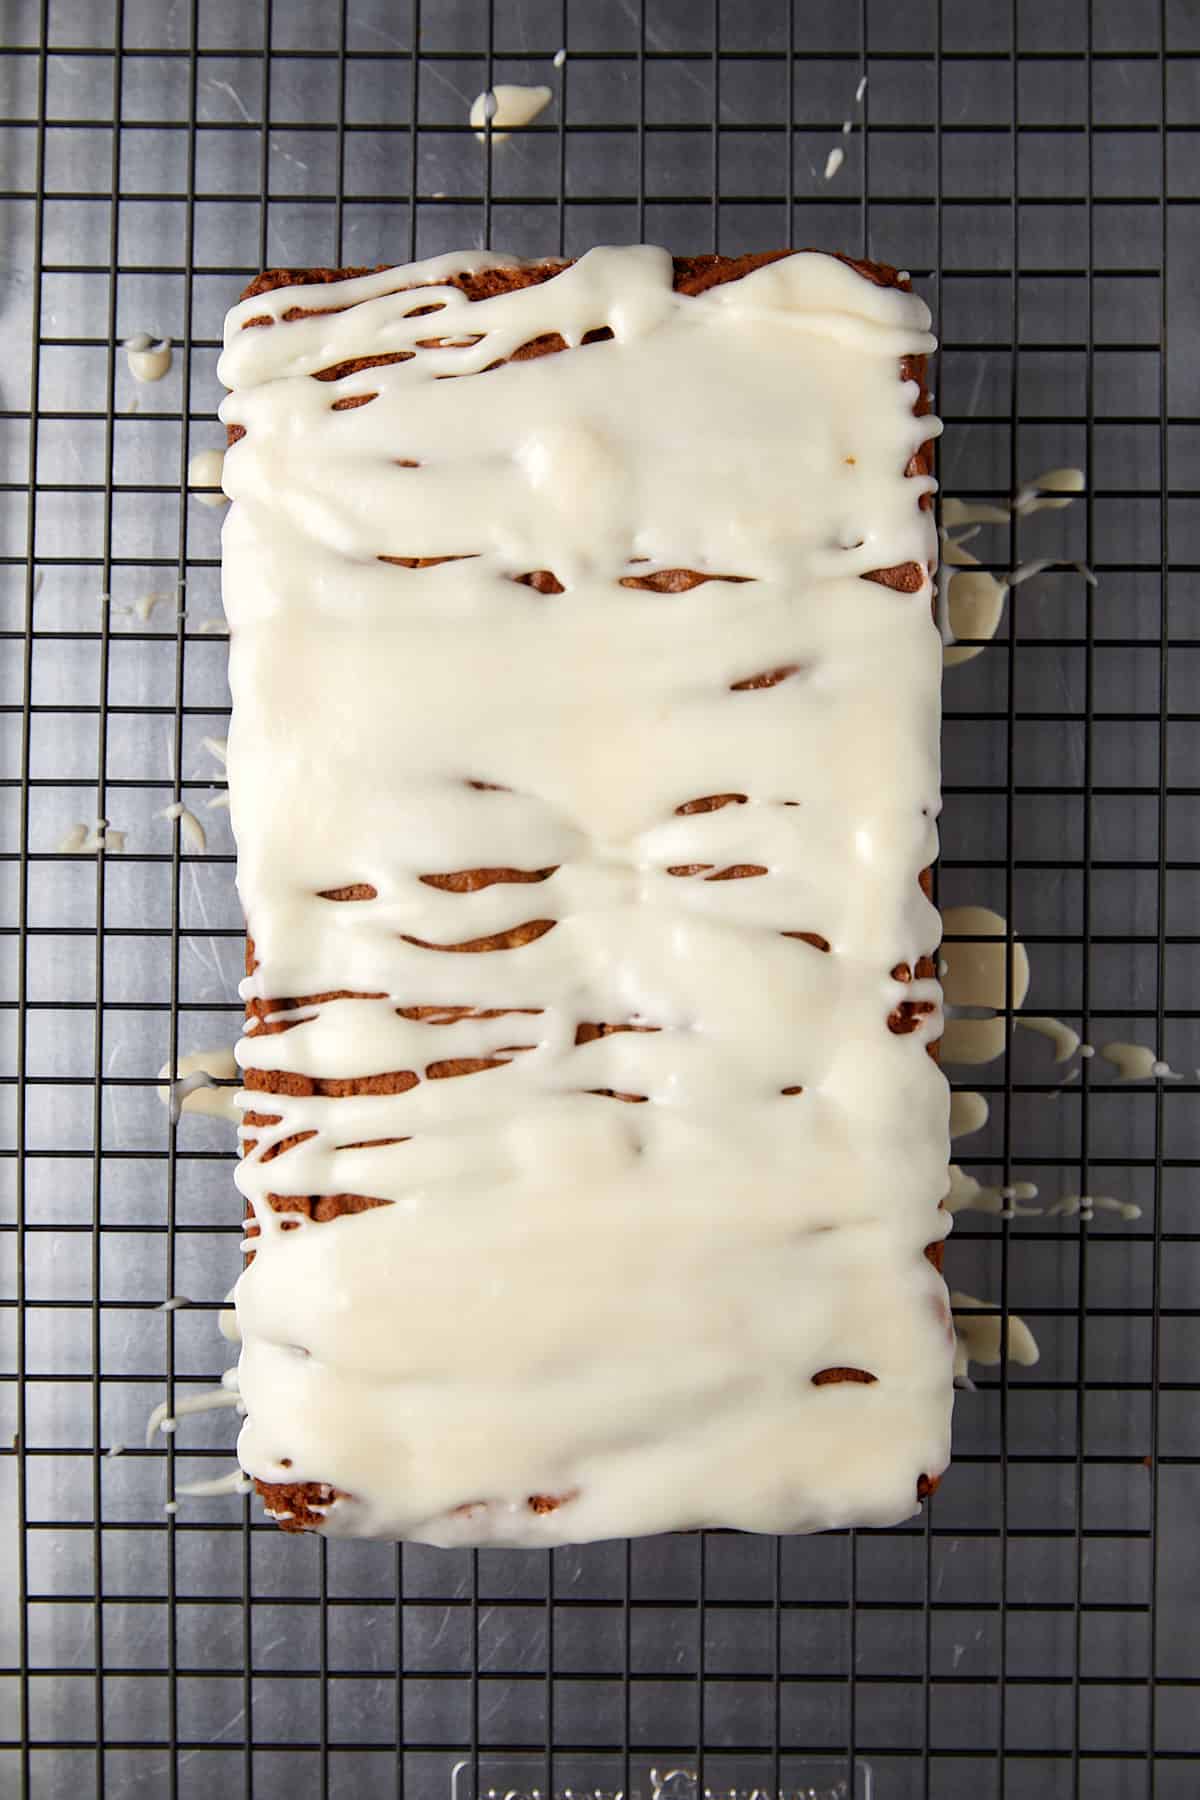 The image presents a loaf cake completely covered with a layer of white icing, placed on a wire cooling rack. The icing is spread across the top and has begun to drip down the sides, creating an appealing striped pattern that reveals parts of the cake's crust. The cooling rack's grid contrasts the smooth icing, and a few drops of icing have fallen onto the rack. The white chocolate raspberry loaf cake is now fully dressed and ready to be served, showcasing a finished bake that looks both homemade and delicious.





